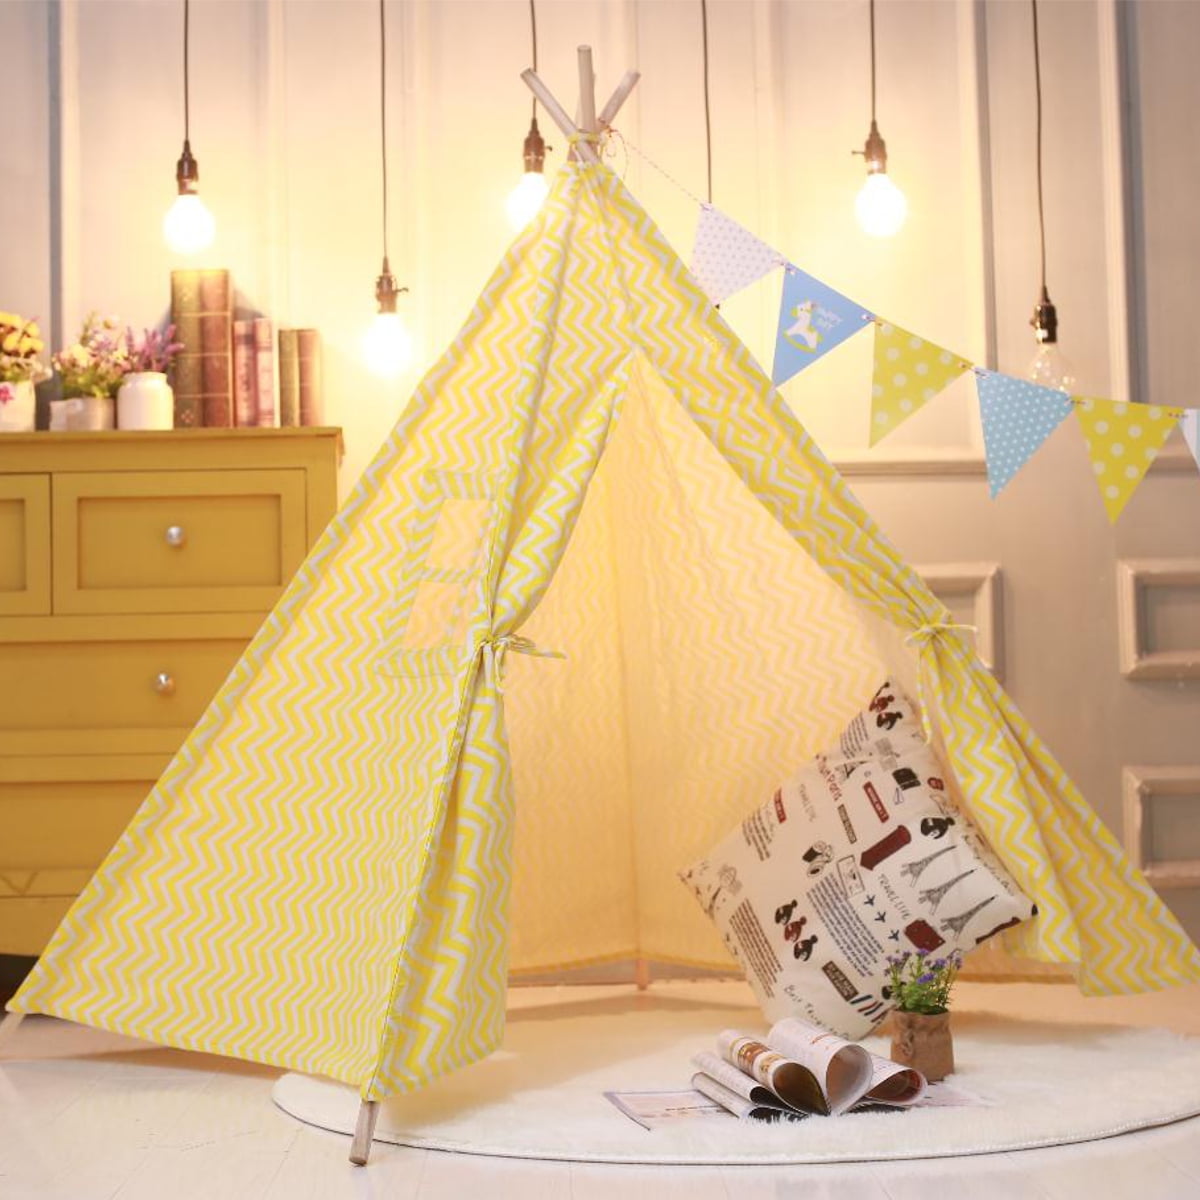 Details about   Children Indian Tent Kids Teepee Playhouse Sleeping Dome Indoor Outdoor W Rug 